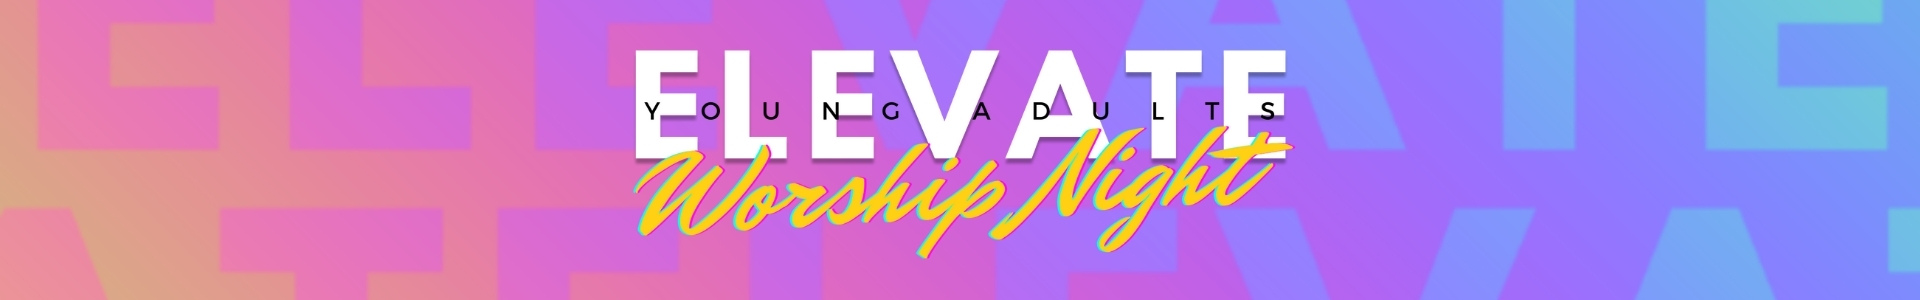 Section header graphic: Elevate Young Adults Worship Night